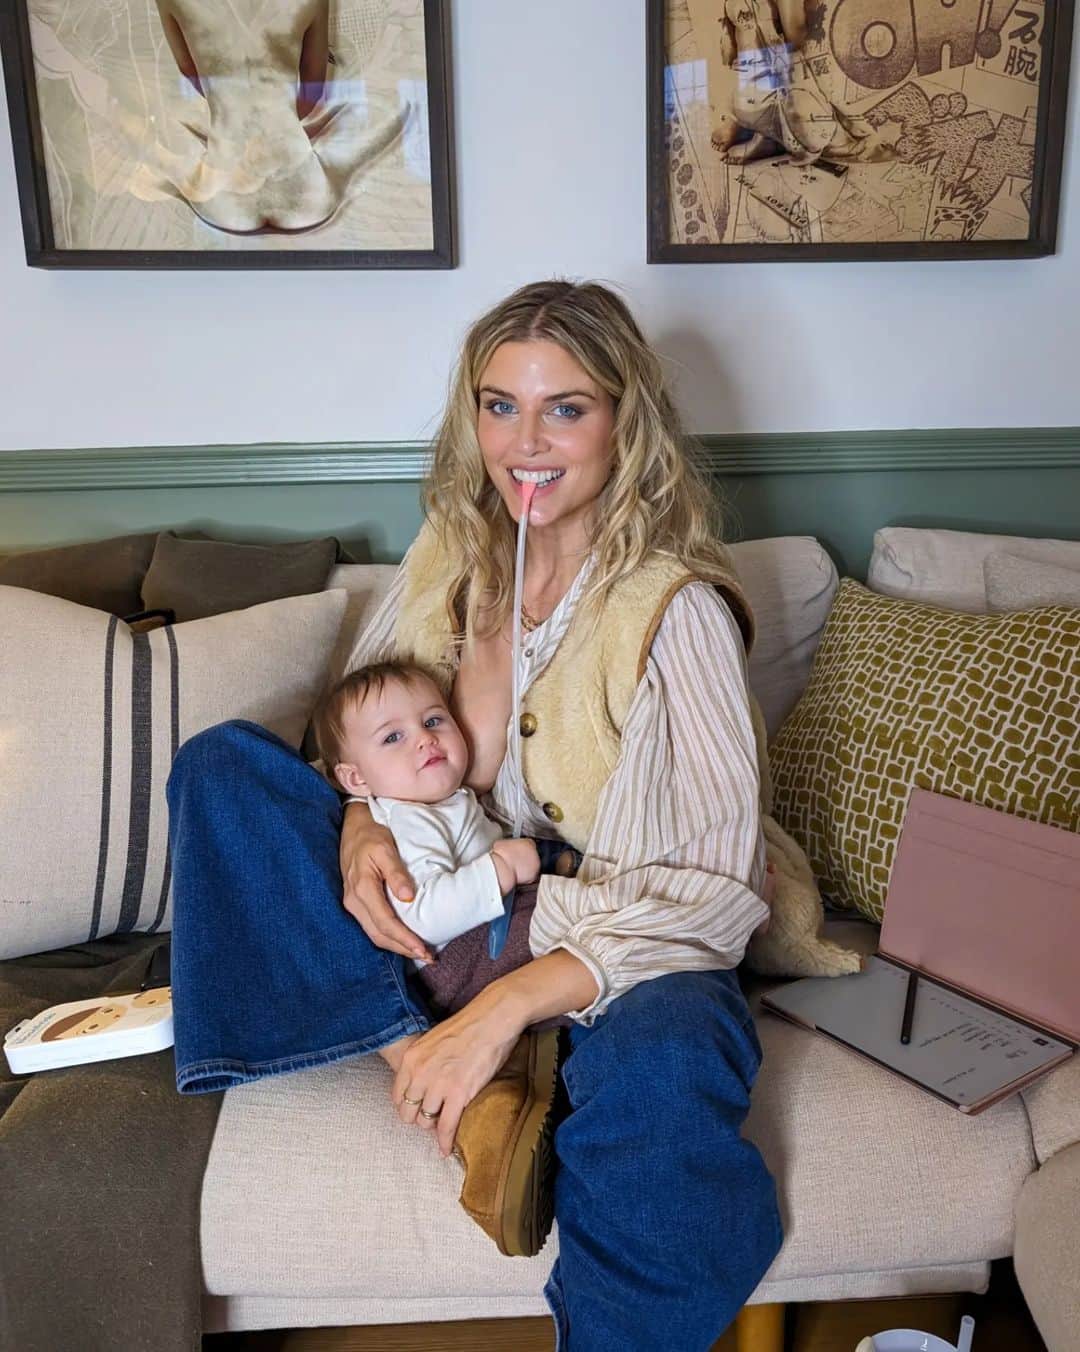 Ashley Jamesのインスタグラム：「It's snot season. 🤧  Got my trusty snot sucker out again today as I navigated the juggle of a teething baby full of head cold who wants all the cuddles, with a photoshoot and a meeting.   Someone told me today that they know people who don't use the aspirator and just go in with their mouth!! WHO ARE YOU PEOPLE REVEAL YOURSELVES 🤣🤣🤮  You know, one of the biggest misconceptions I had when I first had a baby was that it would take a few weeks to have it all figured out. I remember saying to people, just give me 6 weeks. Or 'yeah I think I've almost got it figured out!'. Like there was just one puzzle piece missing.  Motherhood feels like you just get one piece of the puzzle there and then you lose 5 and they're all the wrong shape. 😂  But you know what, it definitely gets way more joyful and easier in some ways. But the juggle never really seems to go does it?! Especially when you have to mum like you have no job but job like you have no kids. The show must go on! Sometimes it feels like having two full time jobs but you can tell each role about the other! 😂 Anyway, I'm grateful in these times to work for myself so I can have her with me when she's poorly.  I did laugh last night as I woke up at 4am to wash off my spray tan. Like, I'm absolutely mad. Never in my childfree life would I ever understand setting an alarm to wash a spray tan off, I'd just do it at a time that suited. But honestly, I have to get her to bed first to have the best chance of letting it set. Wipes at the ready in case she wakes. 😂 obviously a tan is by no way essential but it always makes me feel SO much more confident in my skin. I mean, we gotta do what makes us feel good. What makes us feel like ourselves, as we navigate postpartum bodies and the sleep deprivation. It just stops me looking grey!  Anyway, hoping that Alf doesn't go down too! Although as much as I never ever want either of them to feel ill - it does feel like such a privilege to be the person they want for comfort.  I feel so lucky to be lying here next to them whilst so many children are suffering. I lie awake at night feeling hopelessly sad and I just hope so much for peace. ❤️   I hope you're all doing ok.🙏」